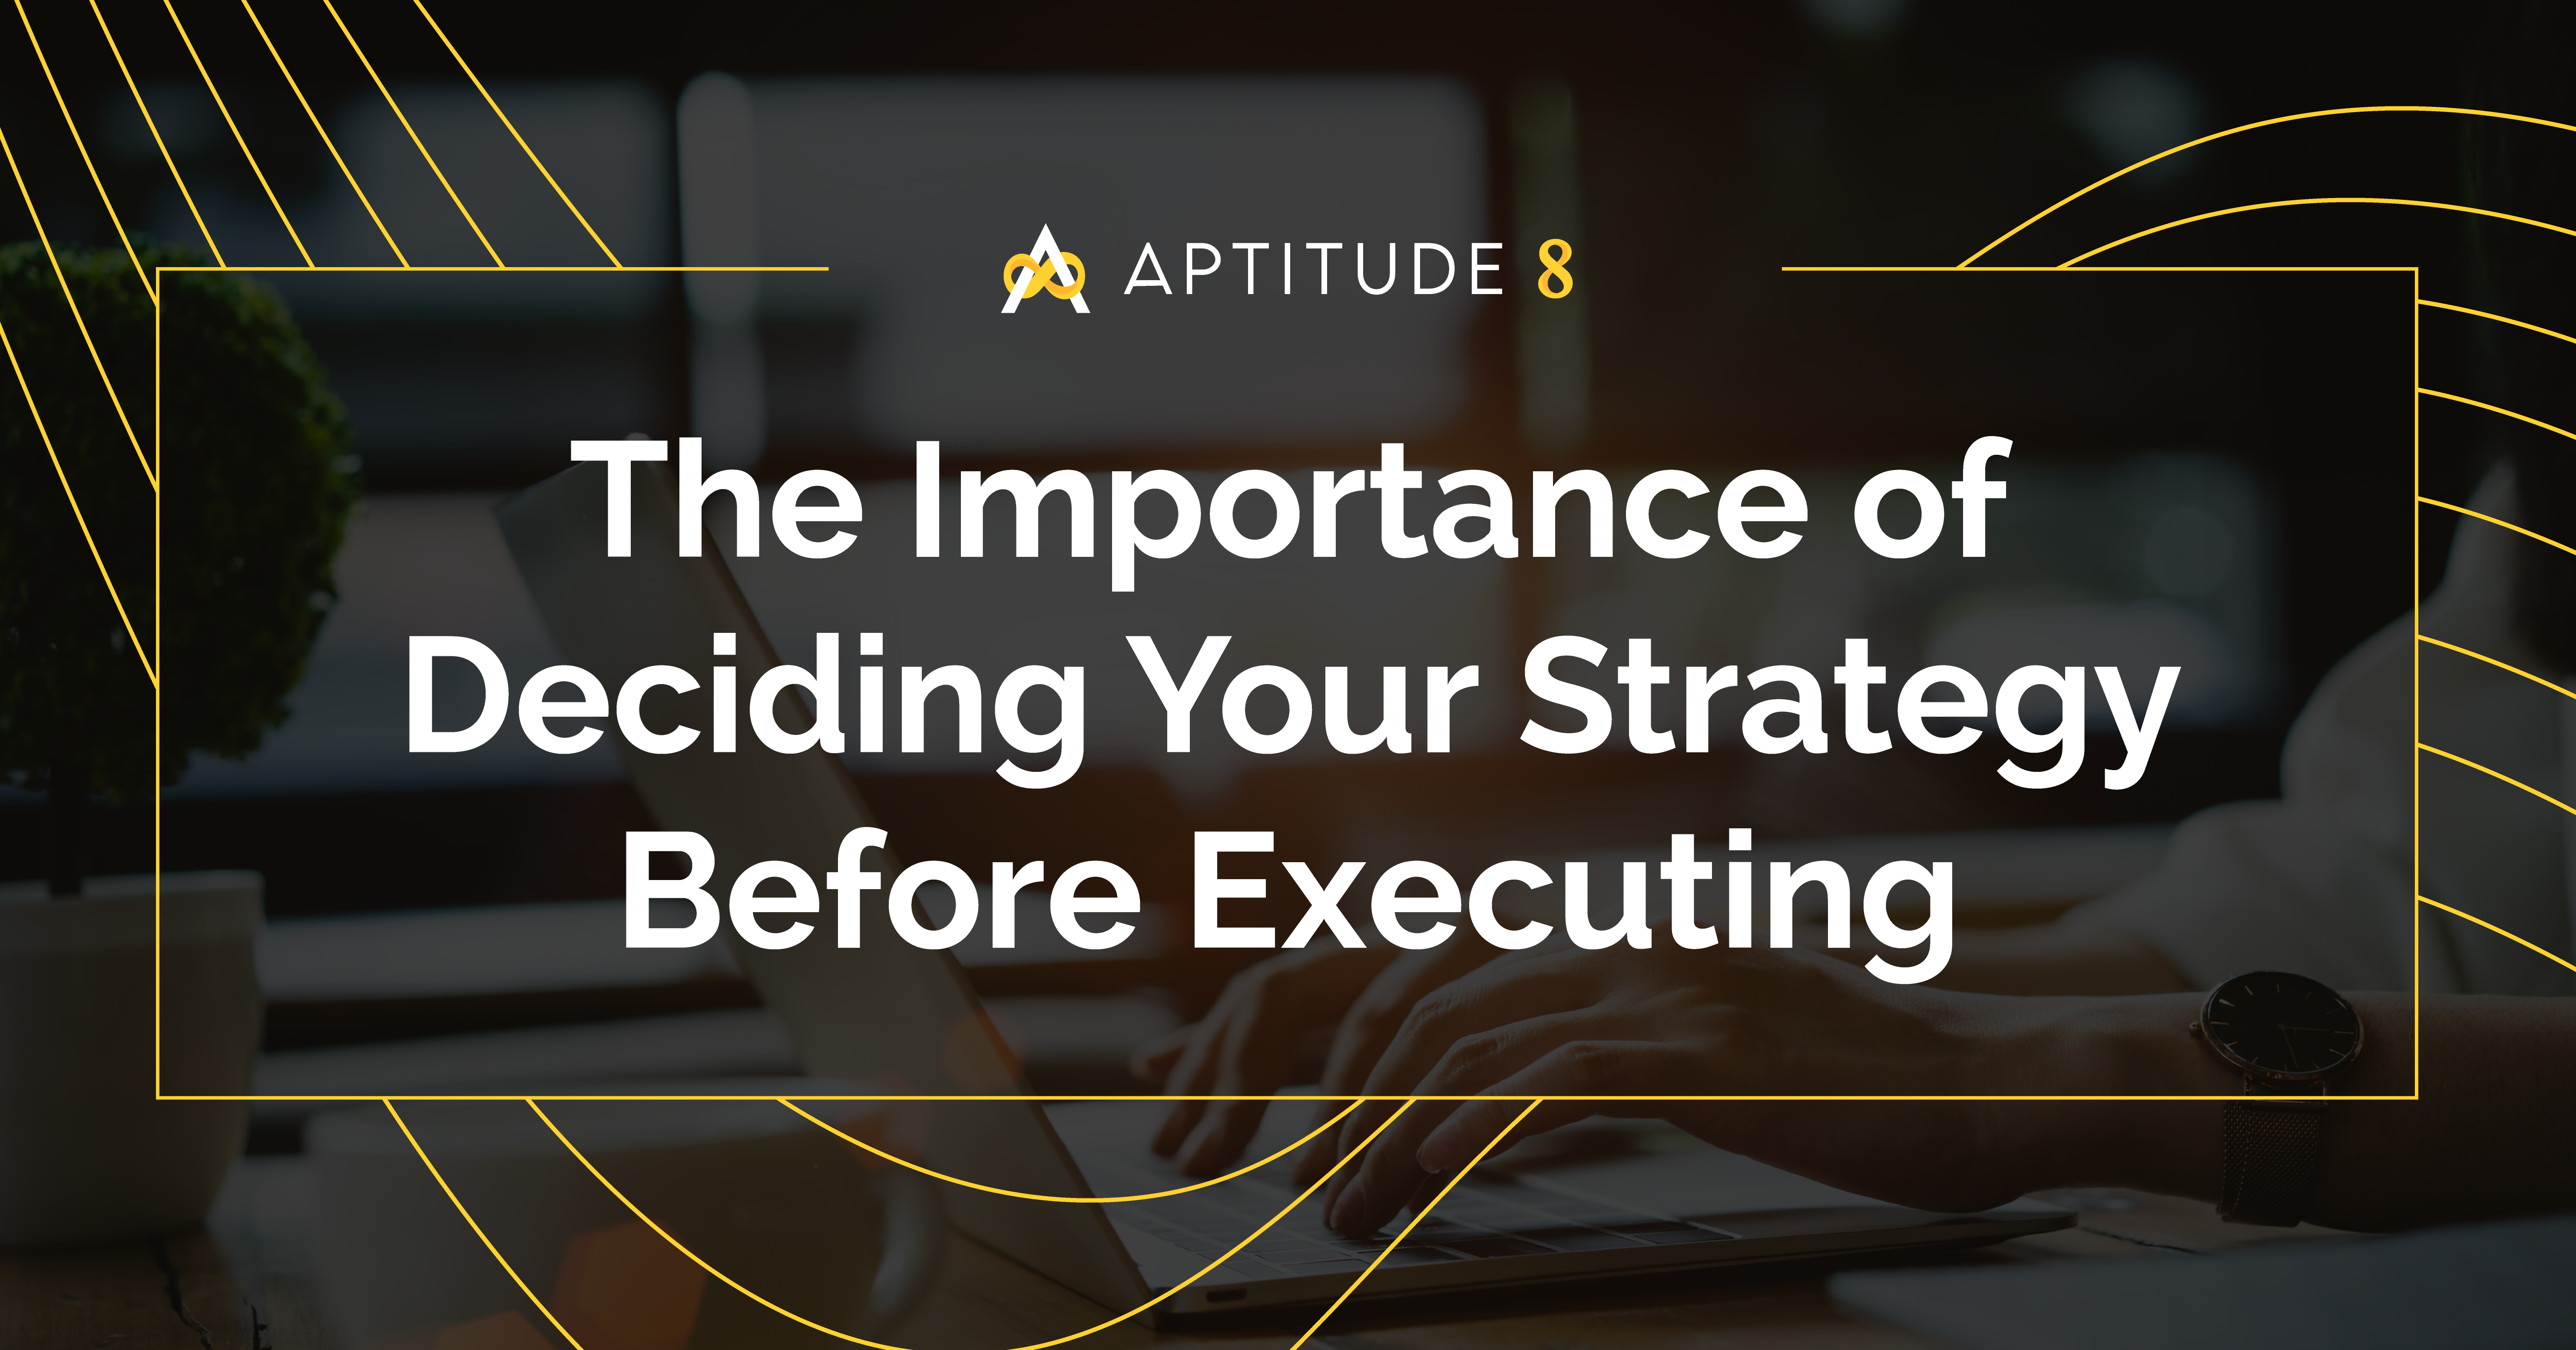 The Importance of Deciding Your Strategy Before Executing